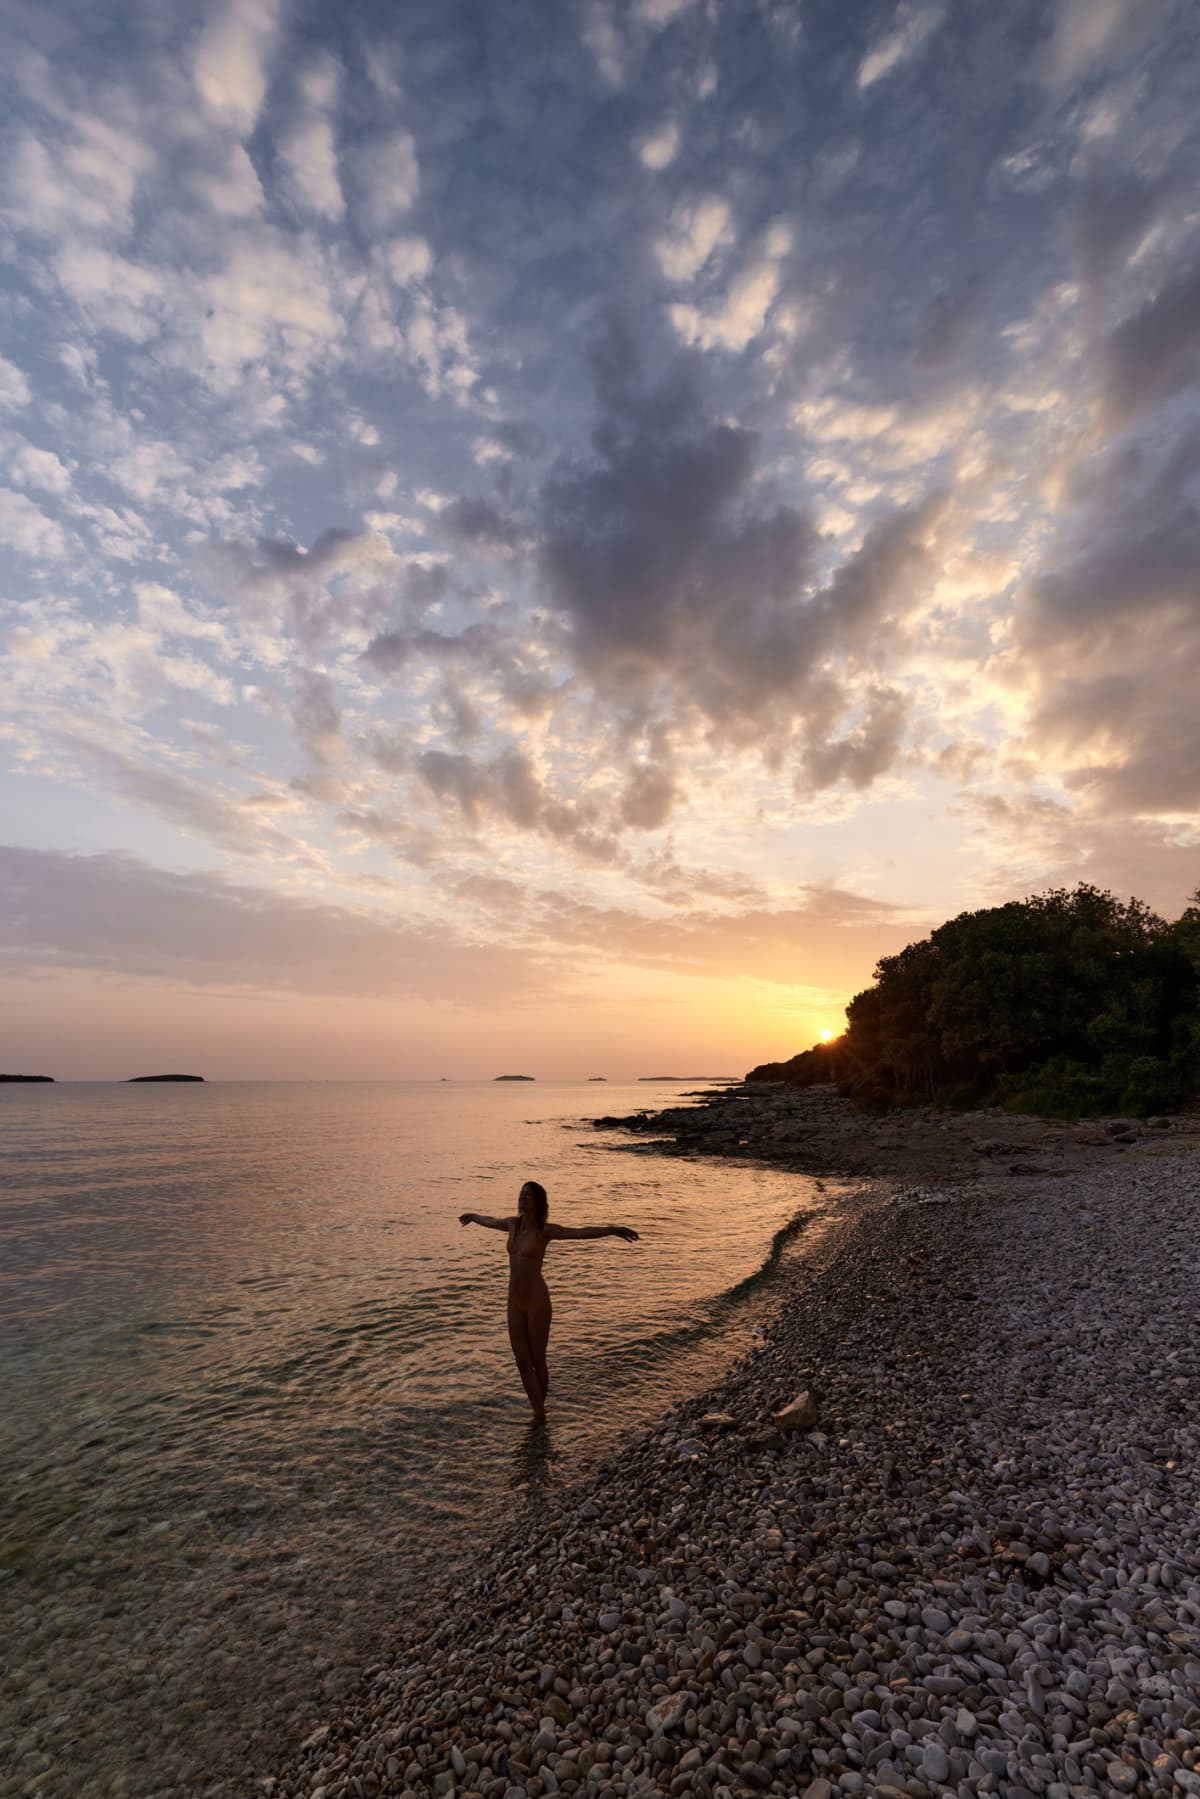 Woman standing alone in the waters of a secluded beach